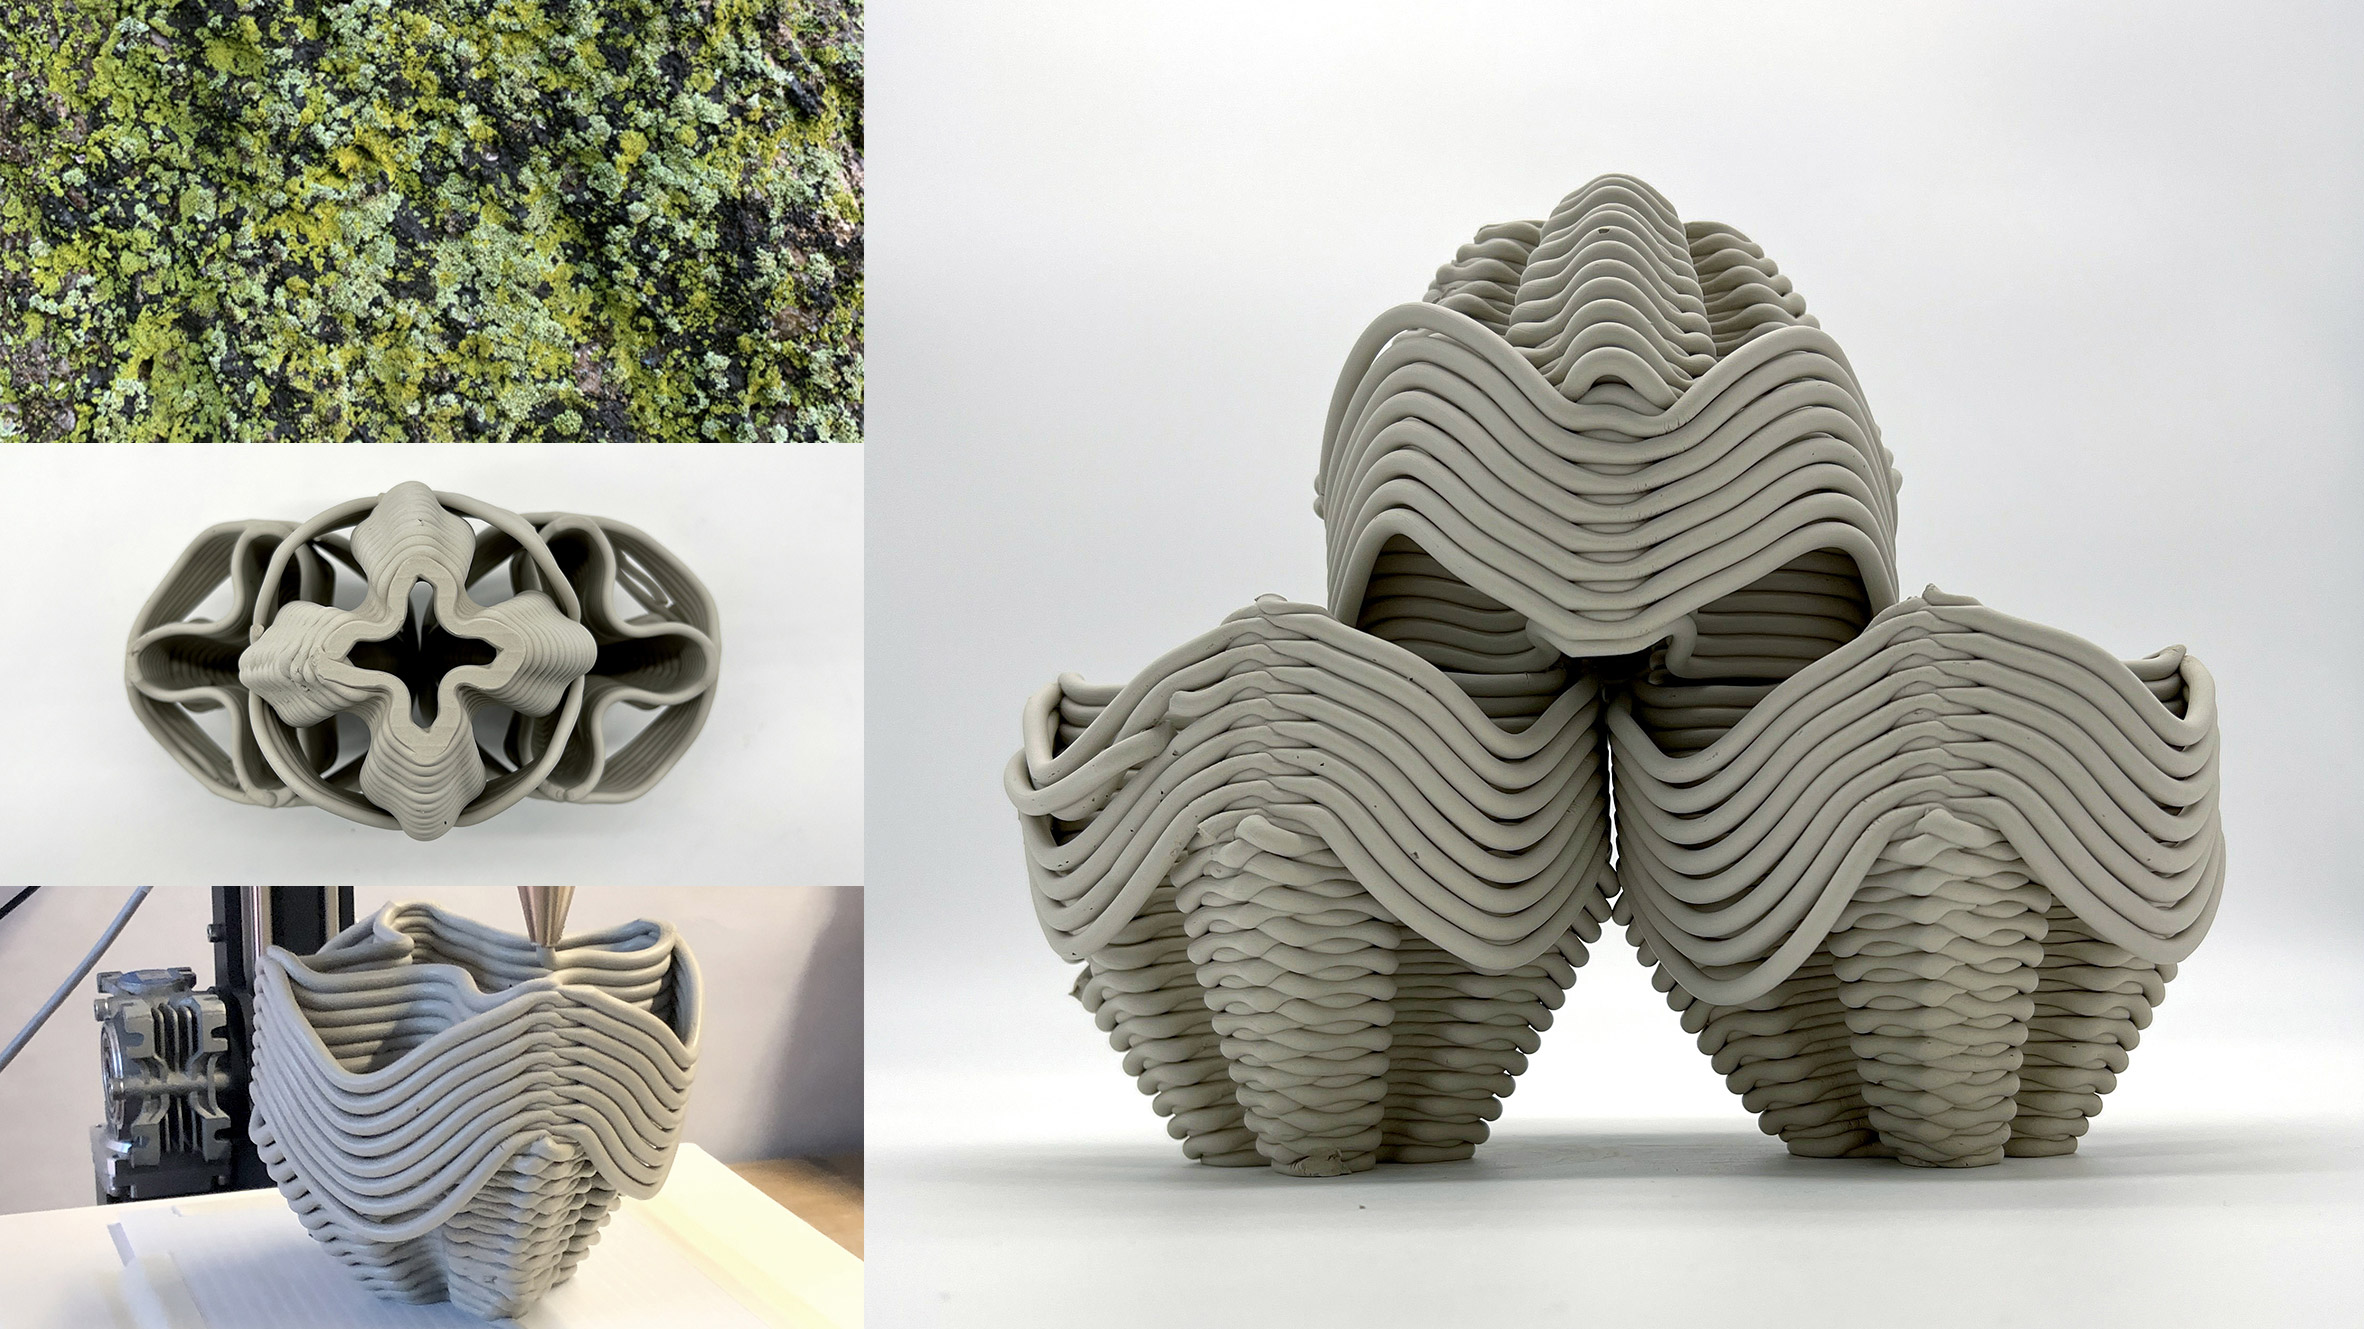 Collage of images including photograph of clay model